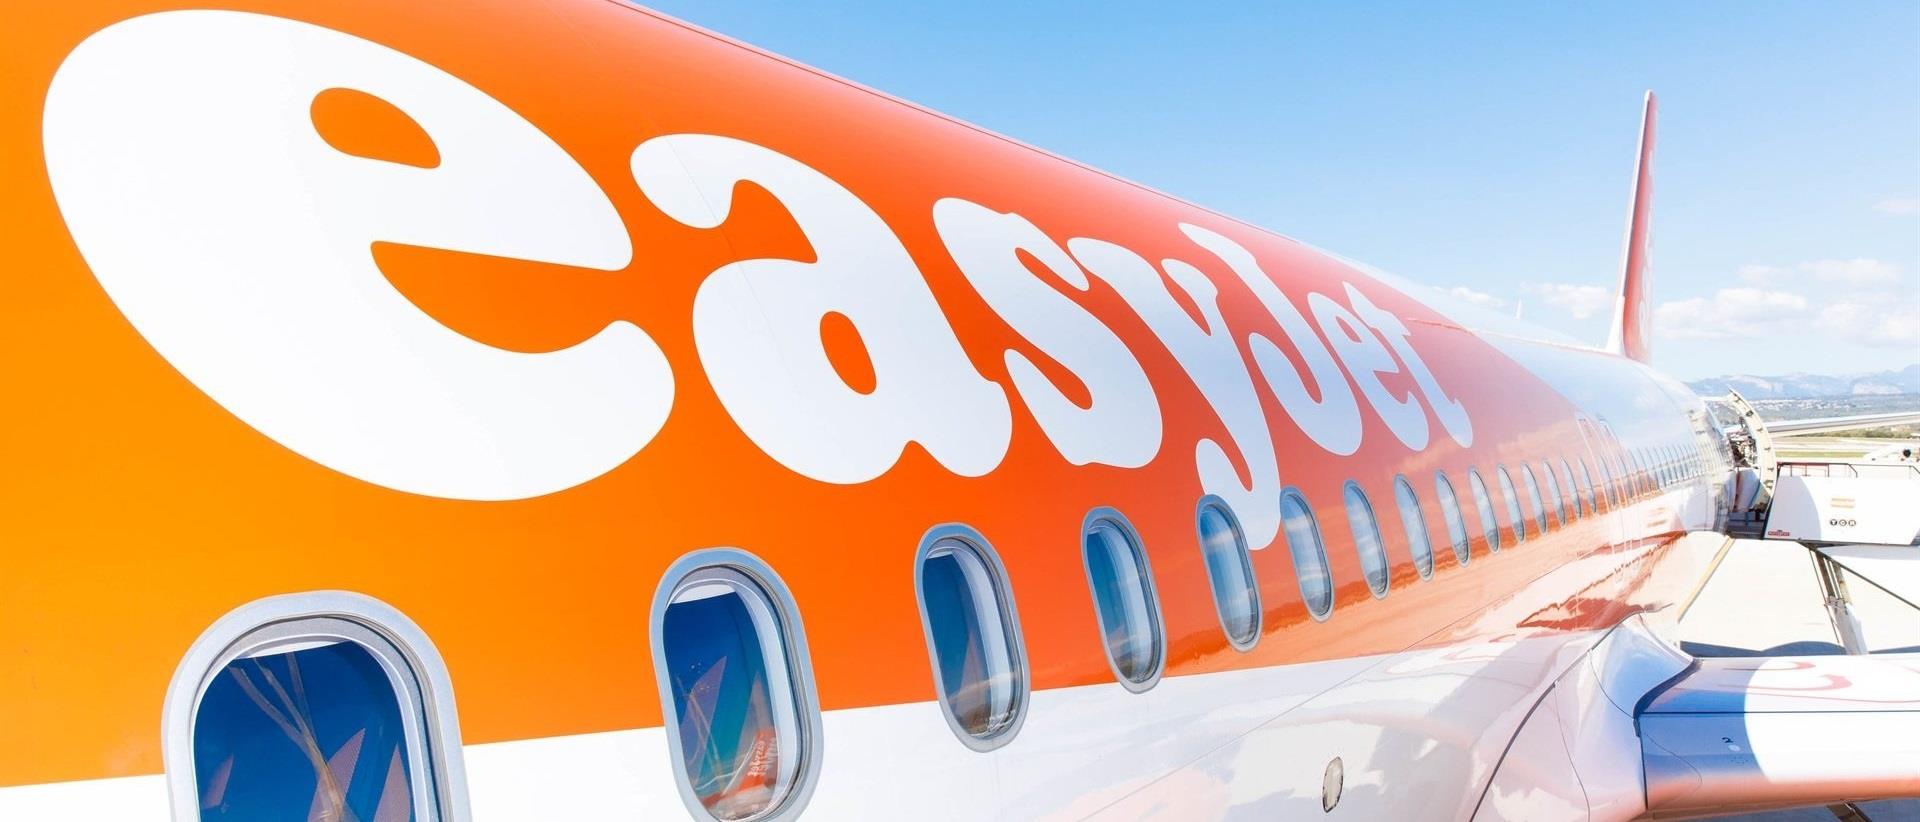 easyJet launches first flight and packages holidays